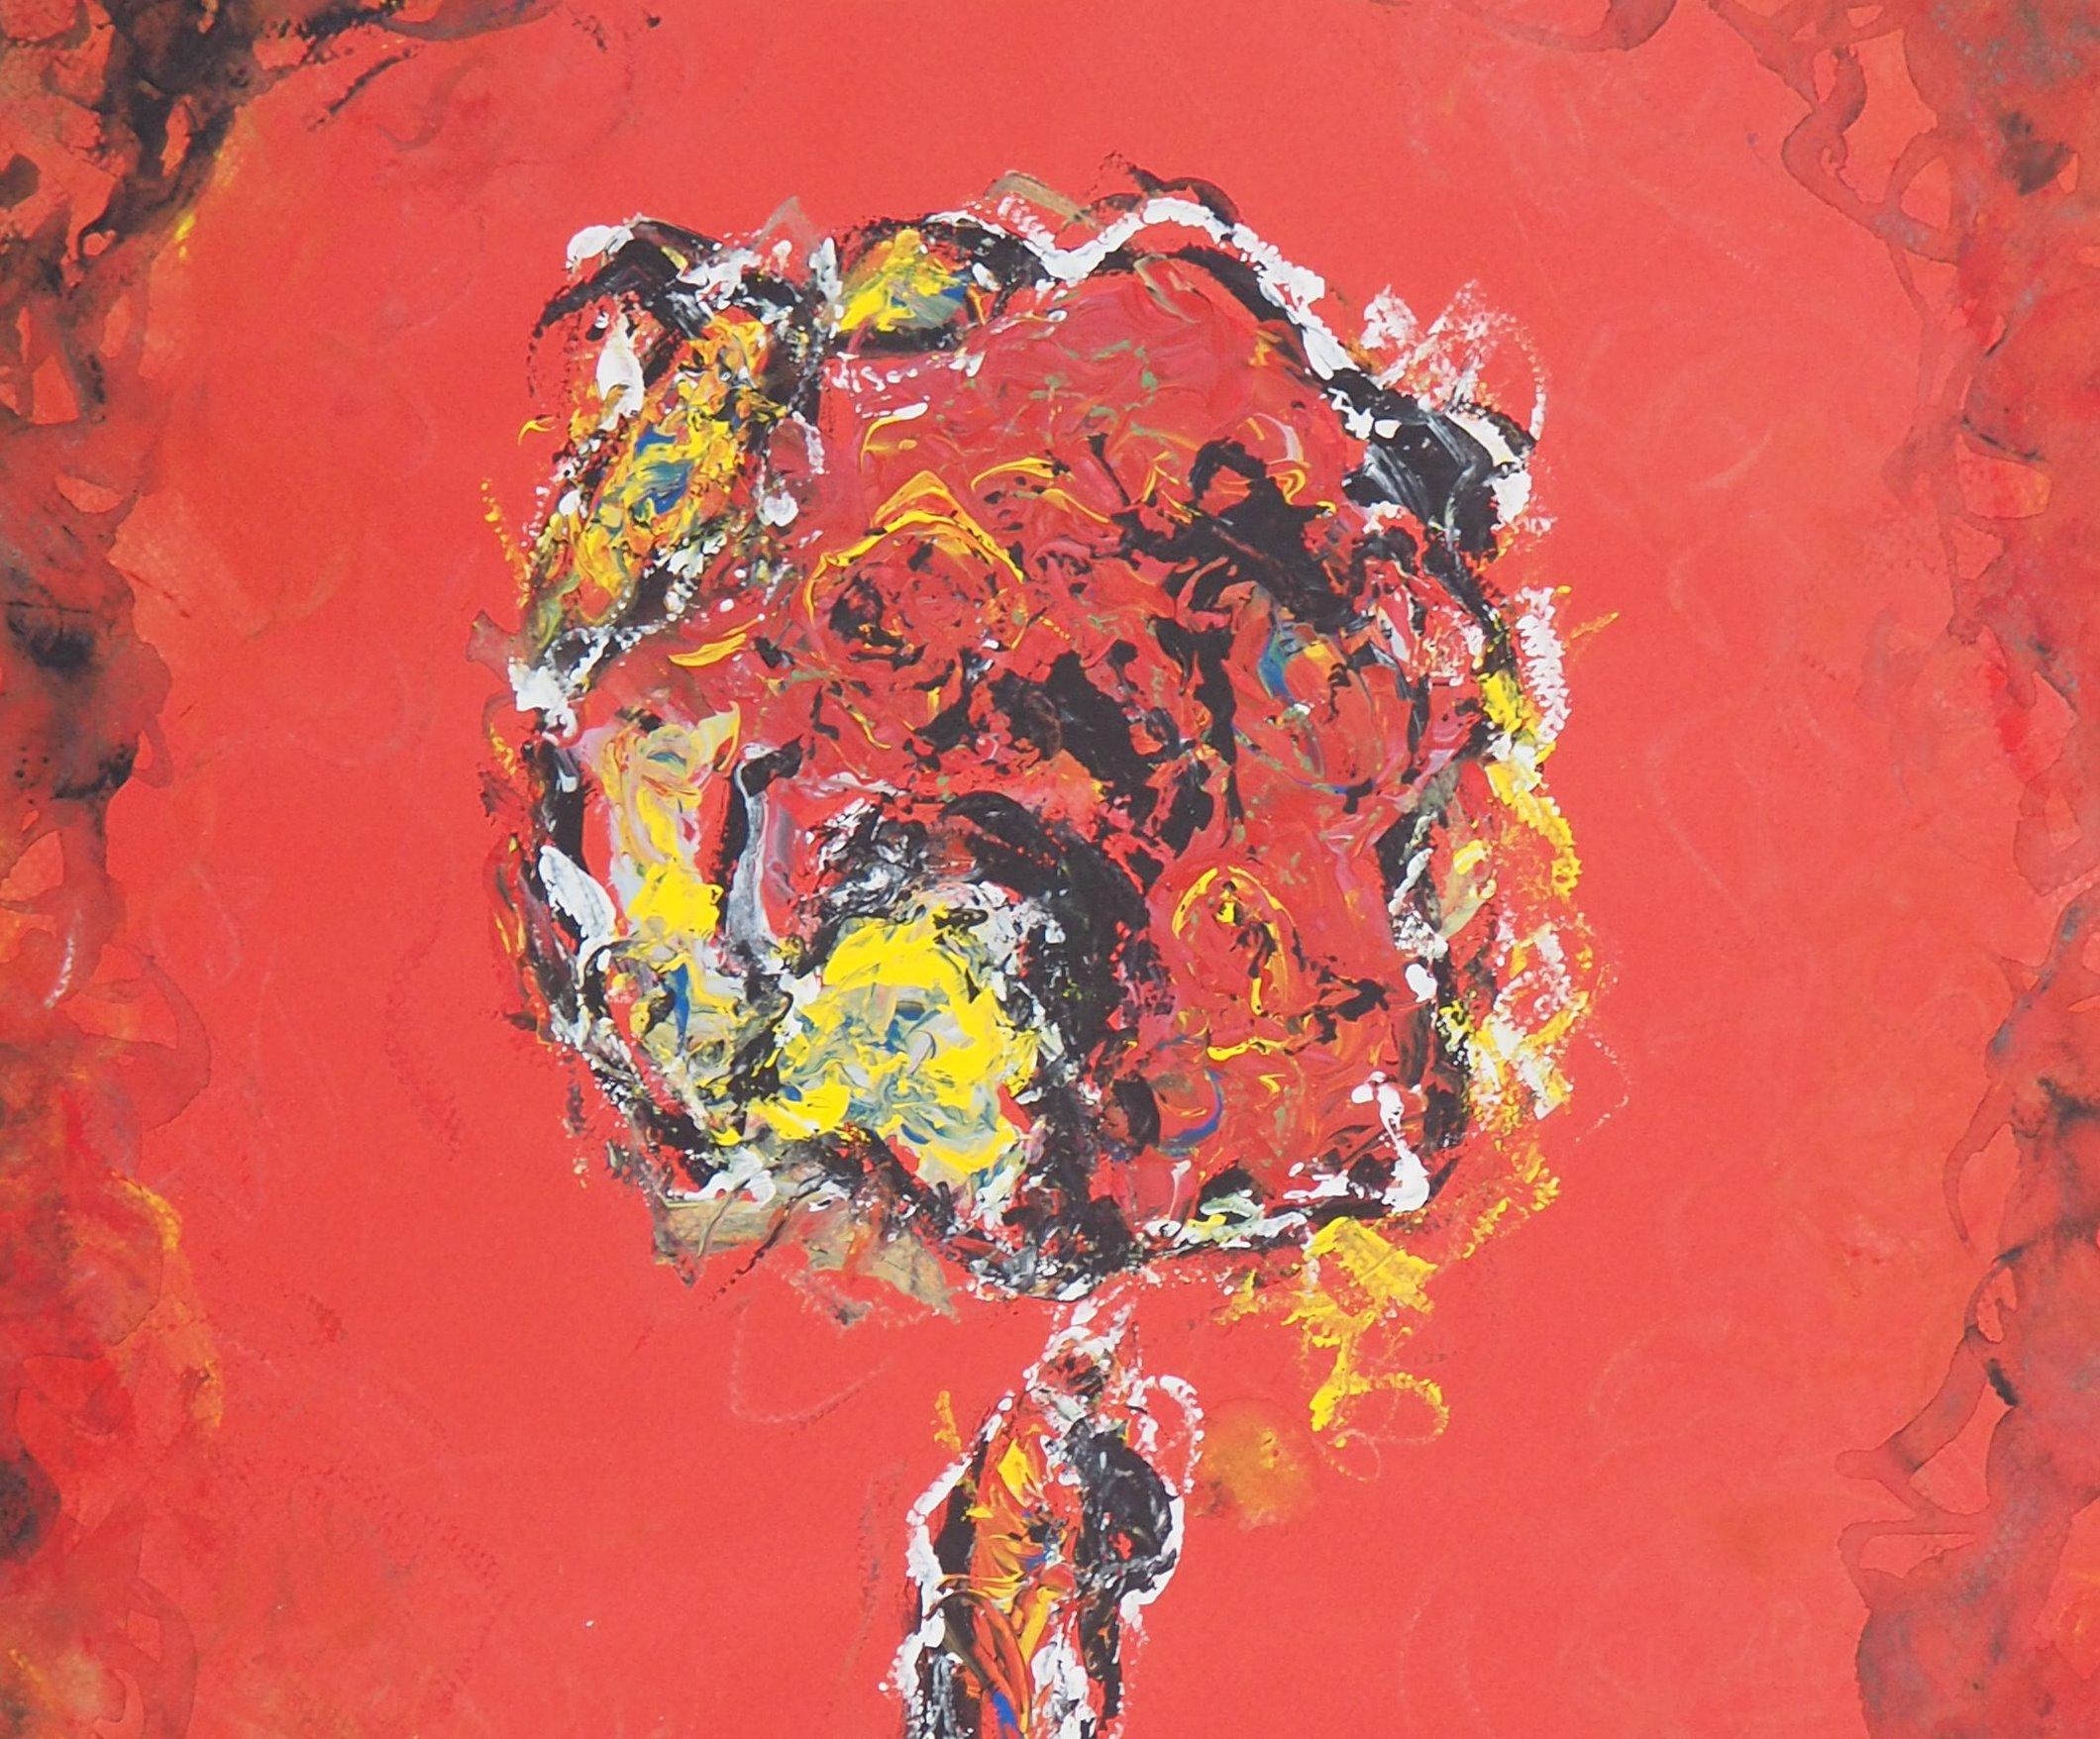 Fauvist rose - original hand signed gouache painting, 1997 - Abstract Expressionist Painting by Michel Guignard